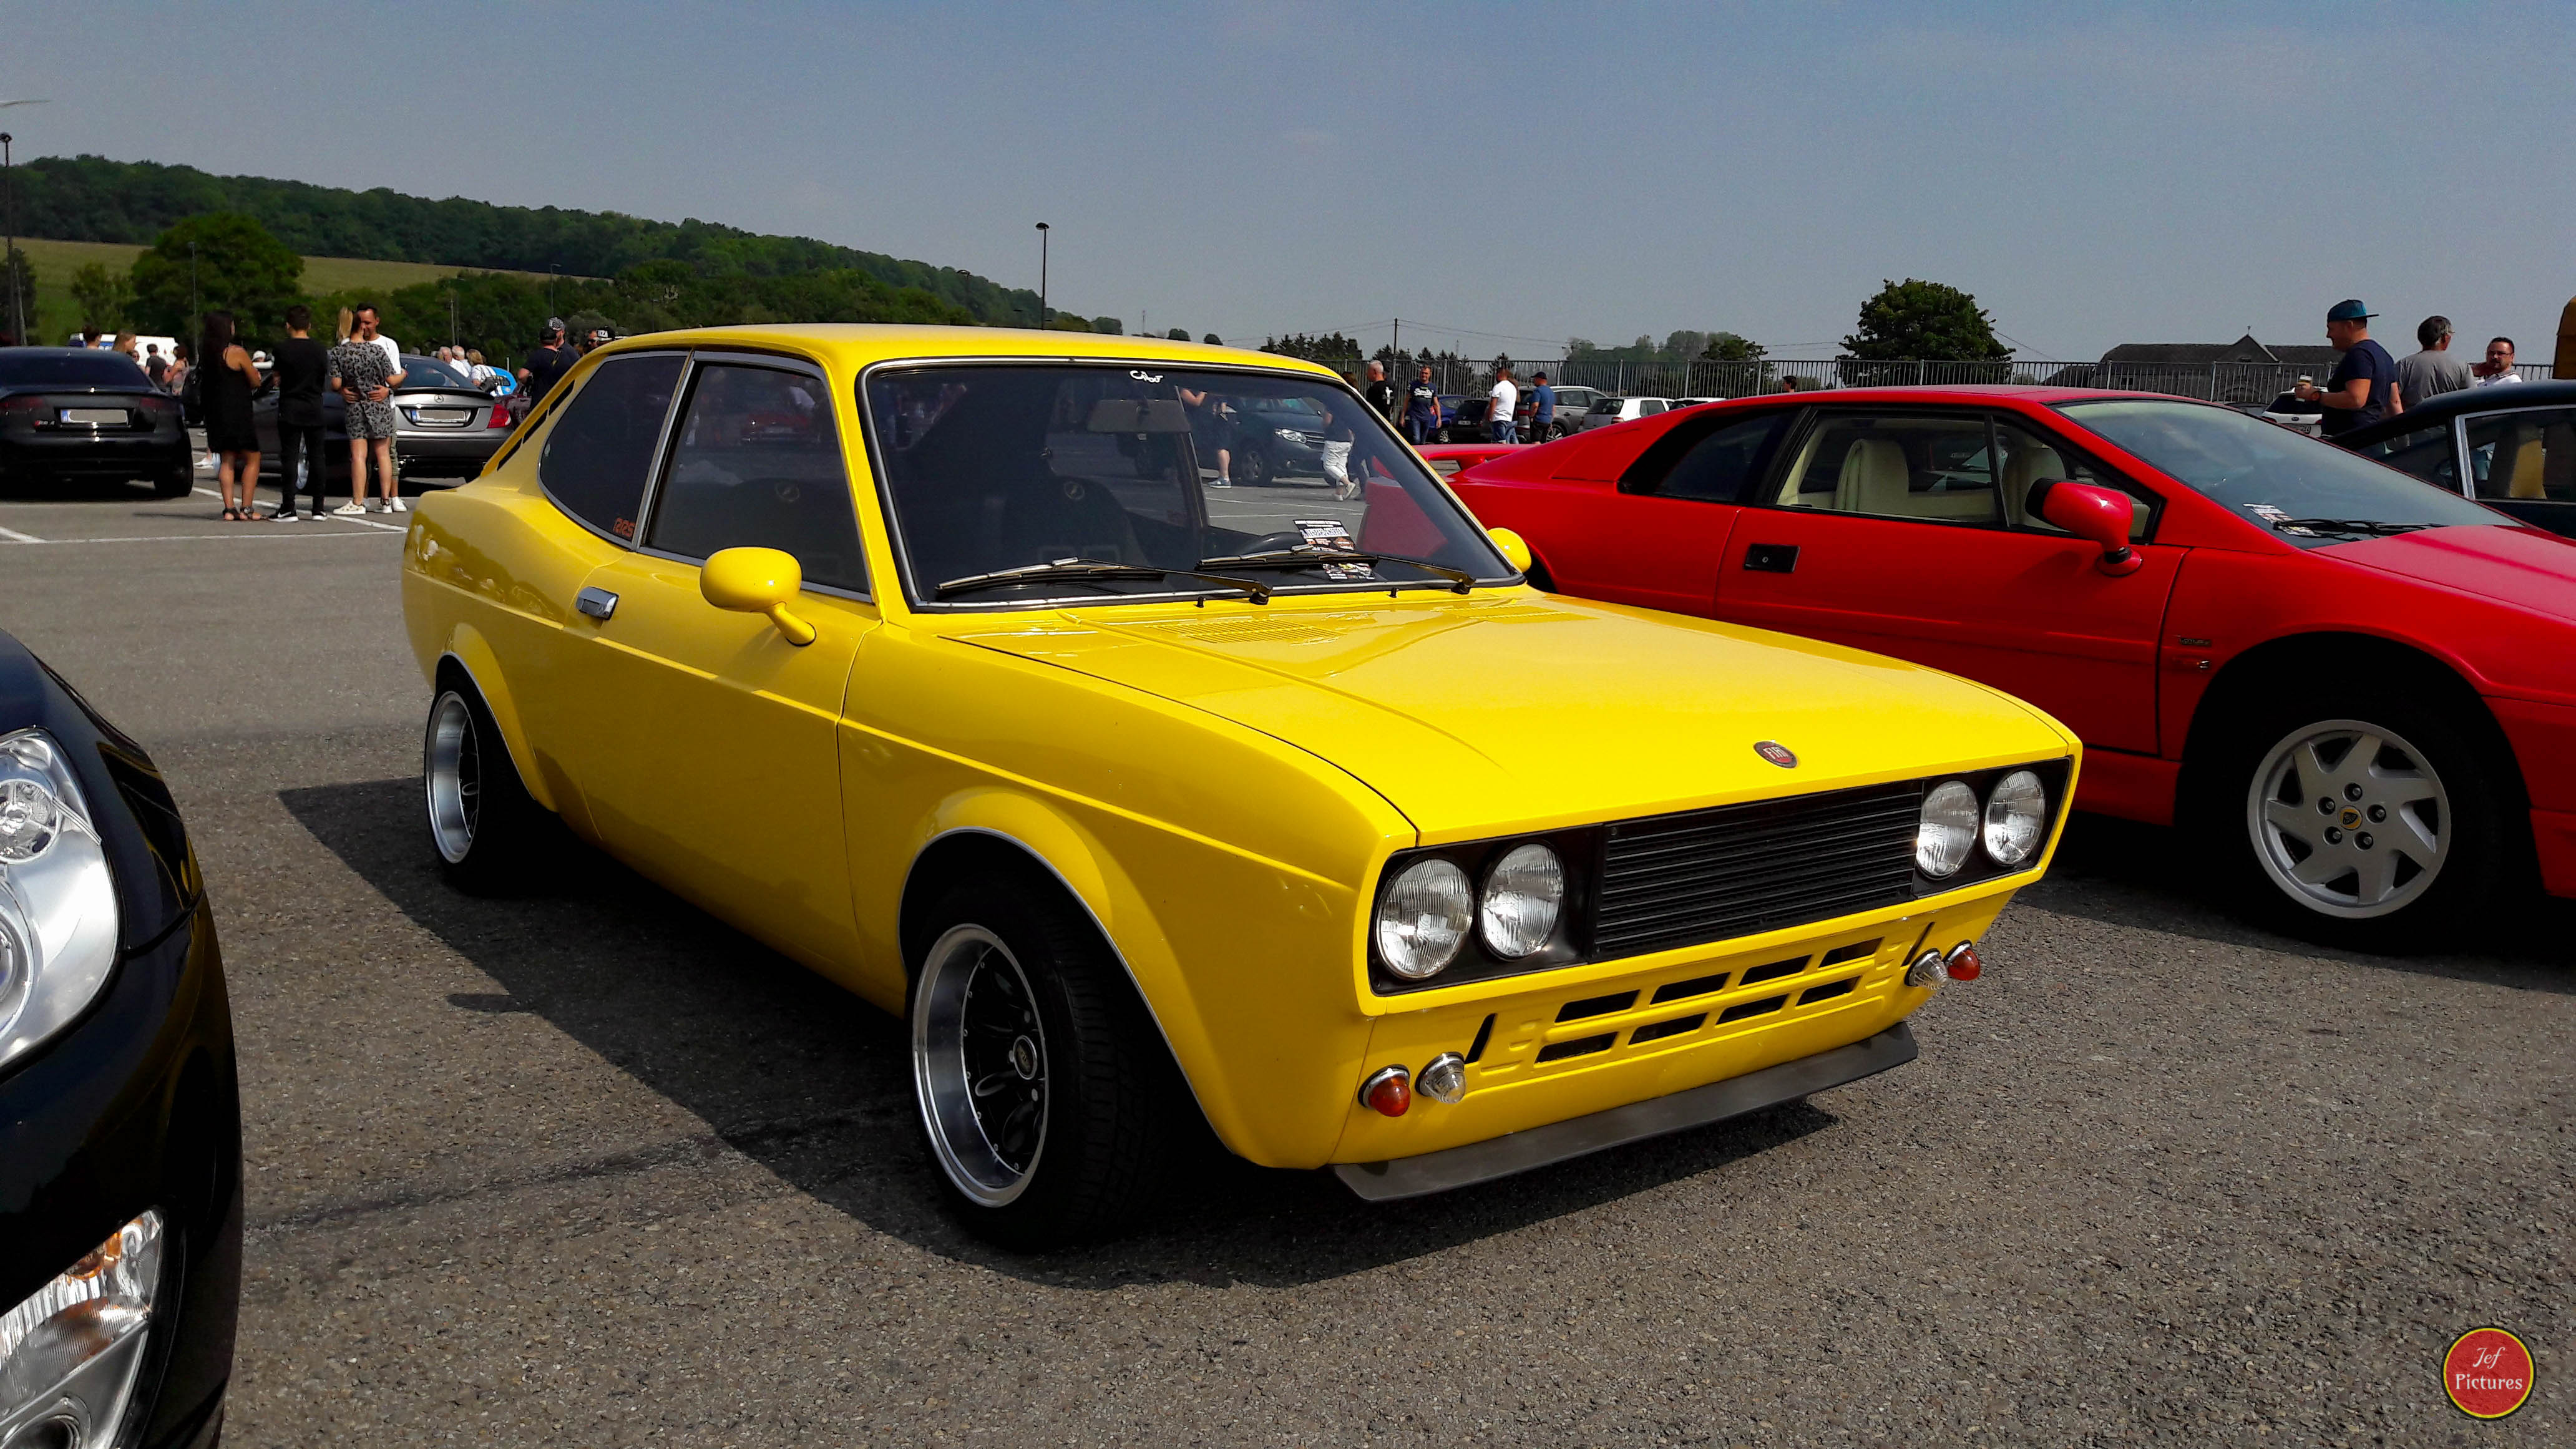 '74 Fiat 128 Sport Coupe 1300 by JBPicsBE on DeviantArt